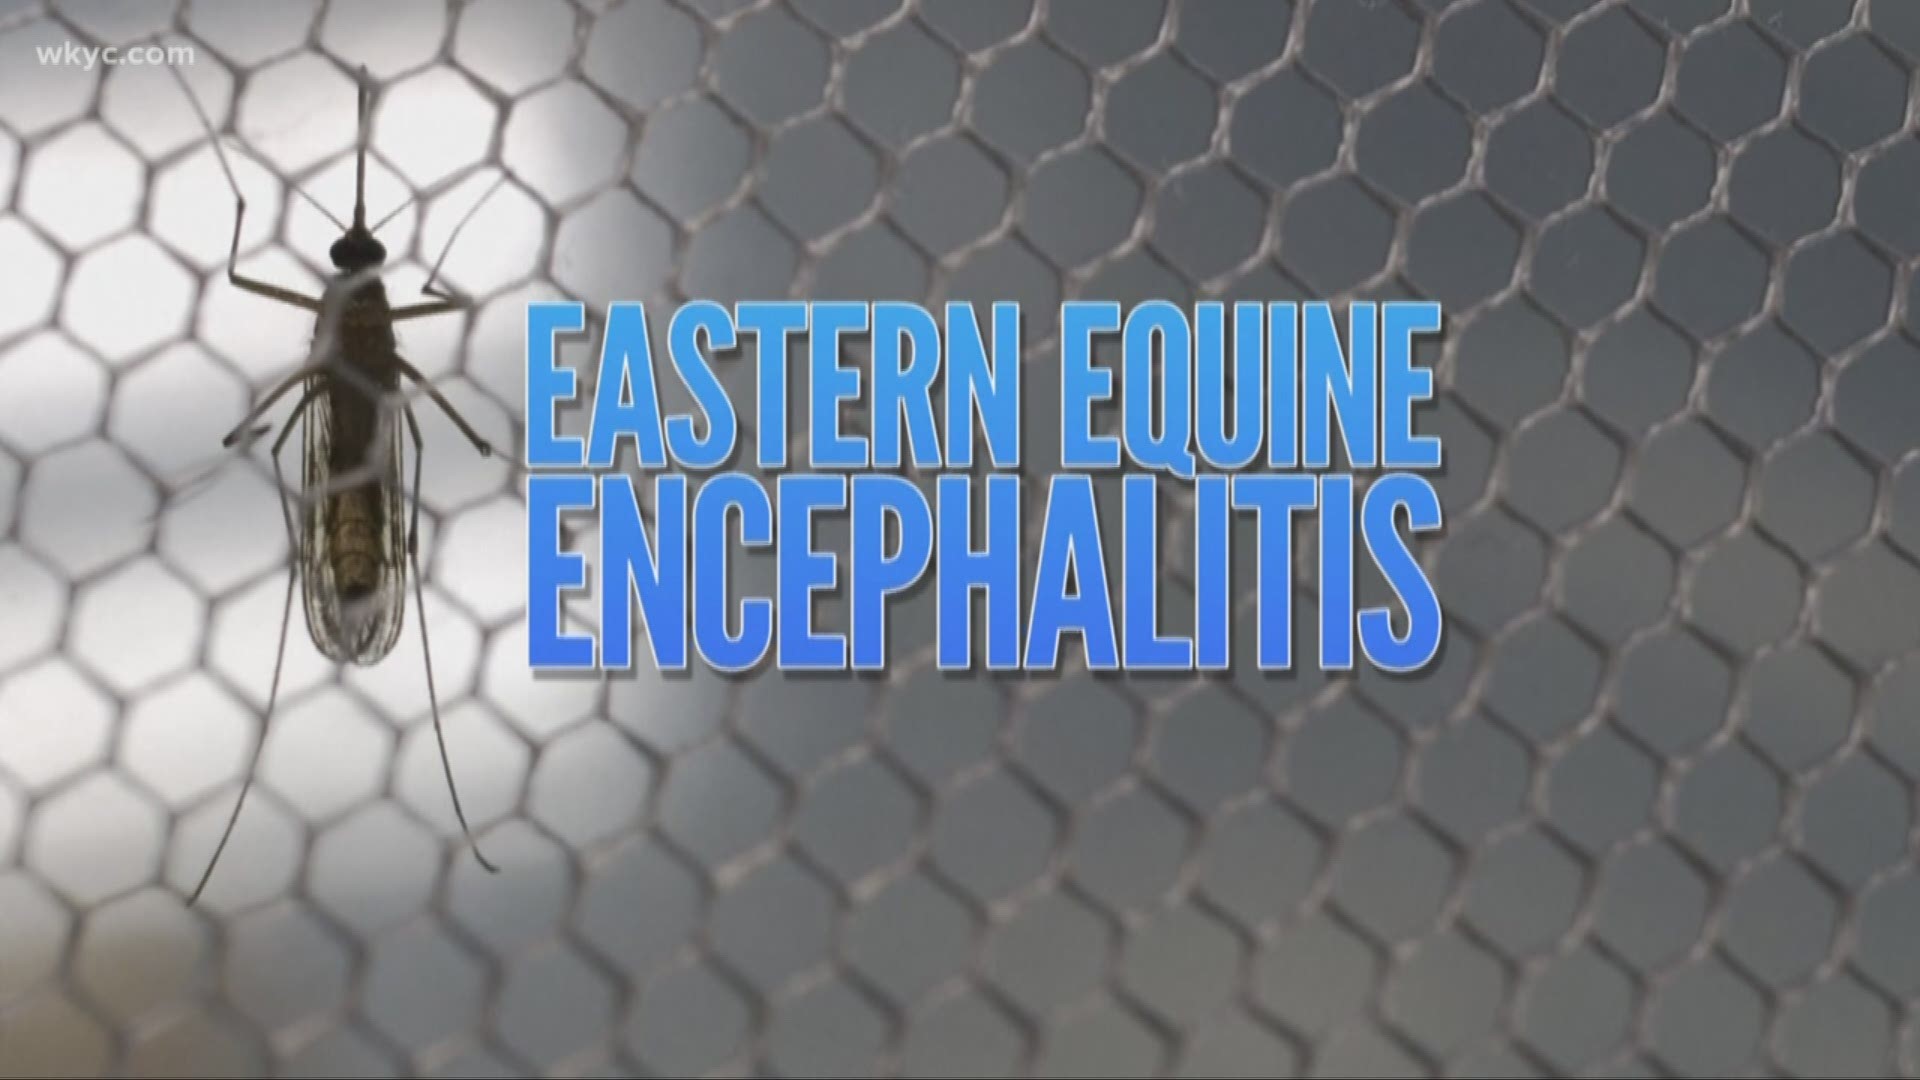 The Ohio Department of Agriculture has confirmed a case of Eastern Equine Encephalitis in a horse in Ashtabula County. EEE is a rare and lethal mosquito virus that claimed the life of a Massachusetts woman over the weekend.